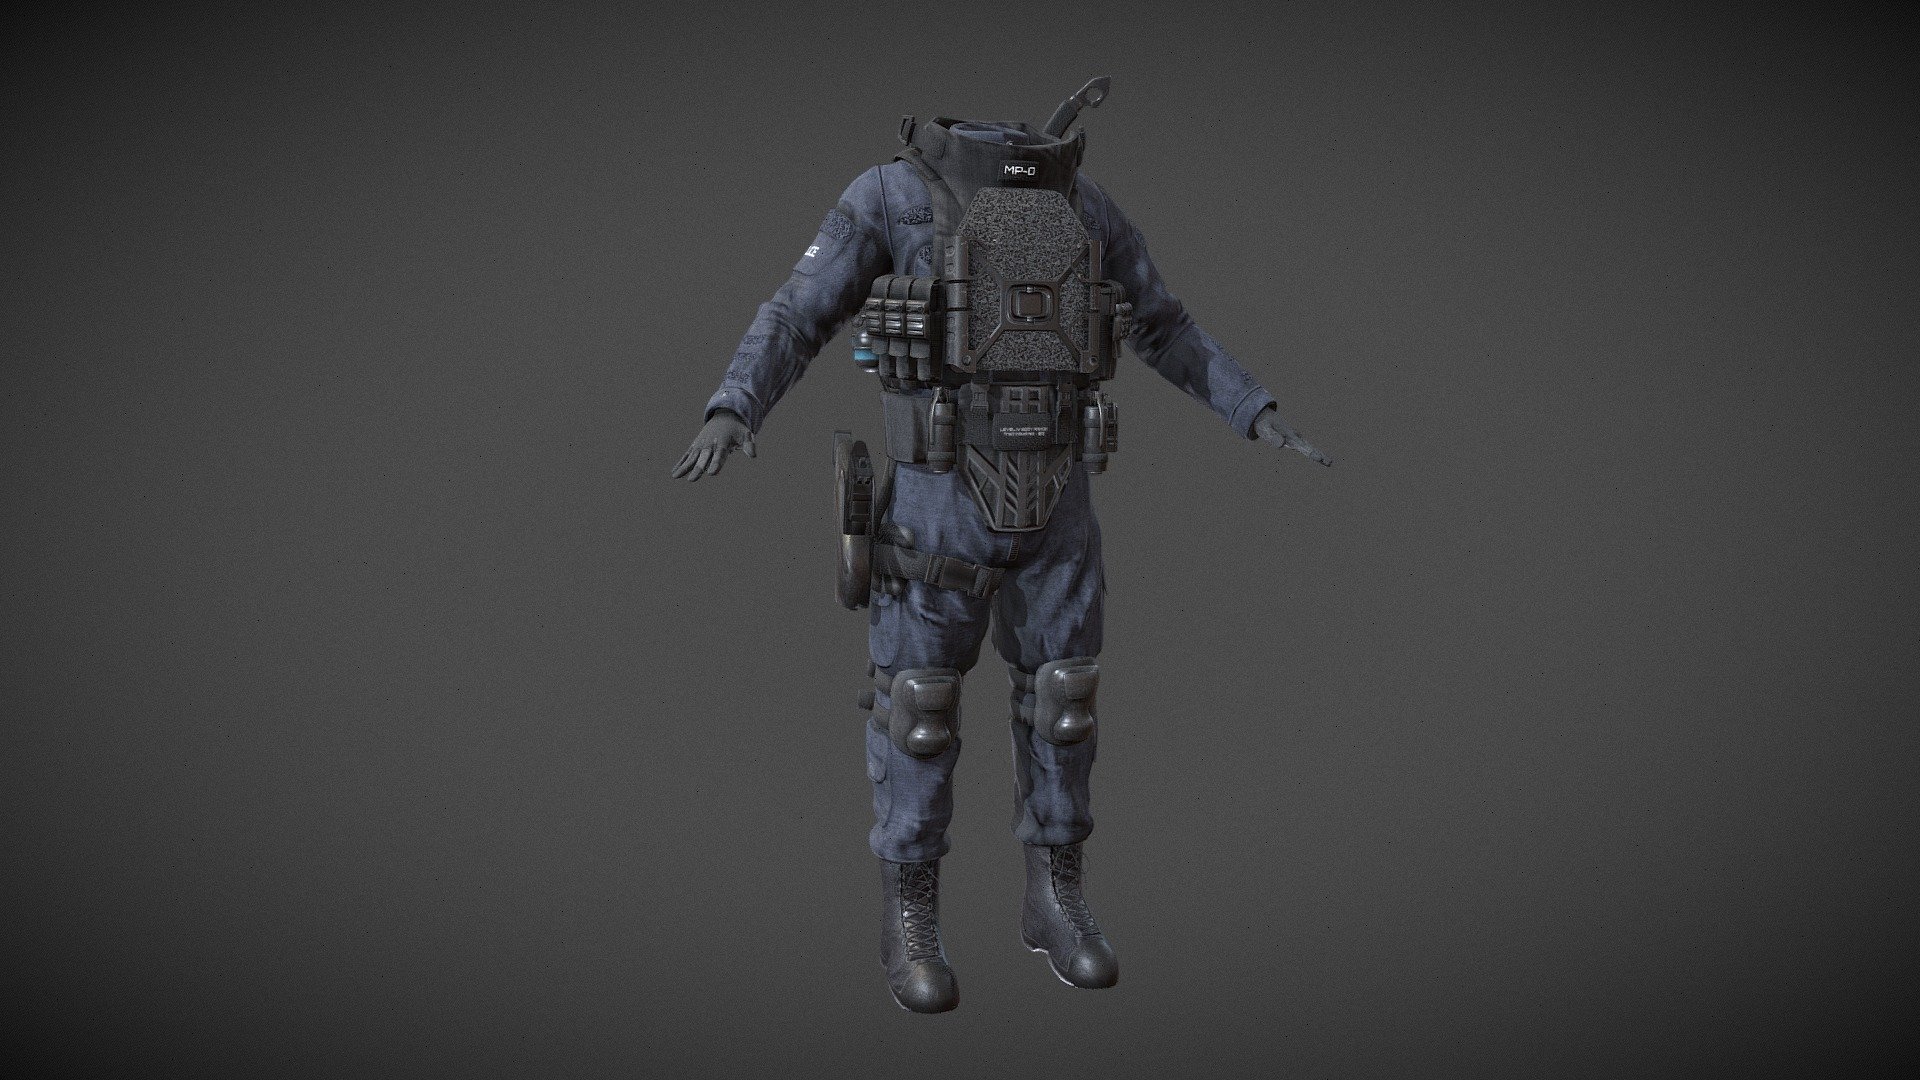 Swat Kit Police Military Body Armor Uniform - Model/Art by Outworld Studios

Must give credit to Outworld Studios if using the asset.

Show support by joining my discord: https://discord.gg/EgWSkp8Cxn

Disclaimer: The Desert Eagle in this kit is the same as my free Desert Eagle from here https://sketchfab.com/3d-models/desert-eagle-a0f4500fe52a429daa29e506f92df5f3 - Swat Police Military Body Armor Uniform Kit - Buy Royalty Free 3D model by Outworld Studios (@outworldstudios) 3d model